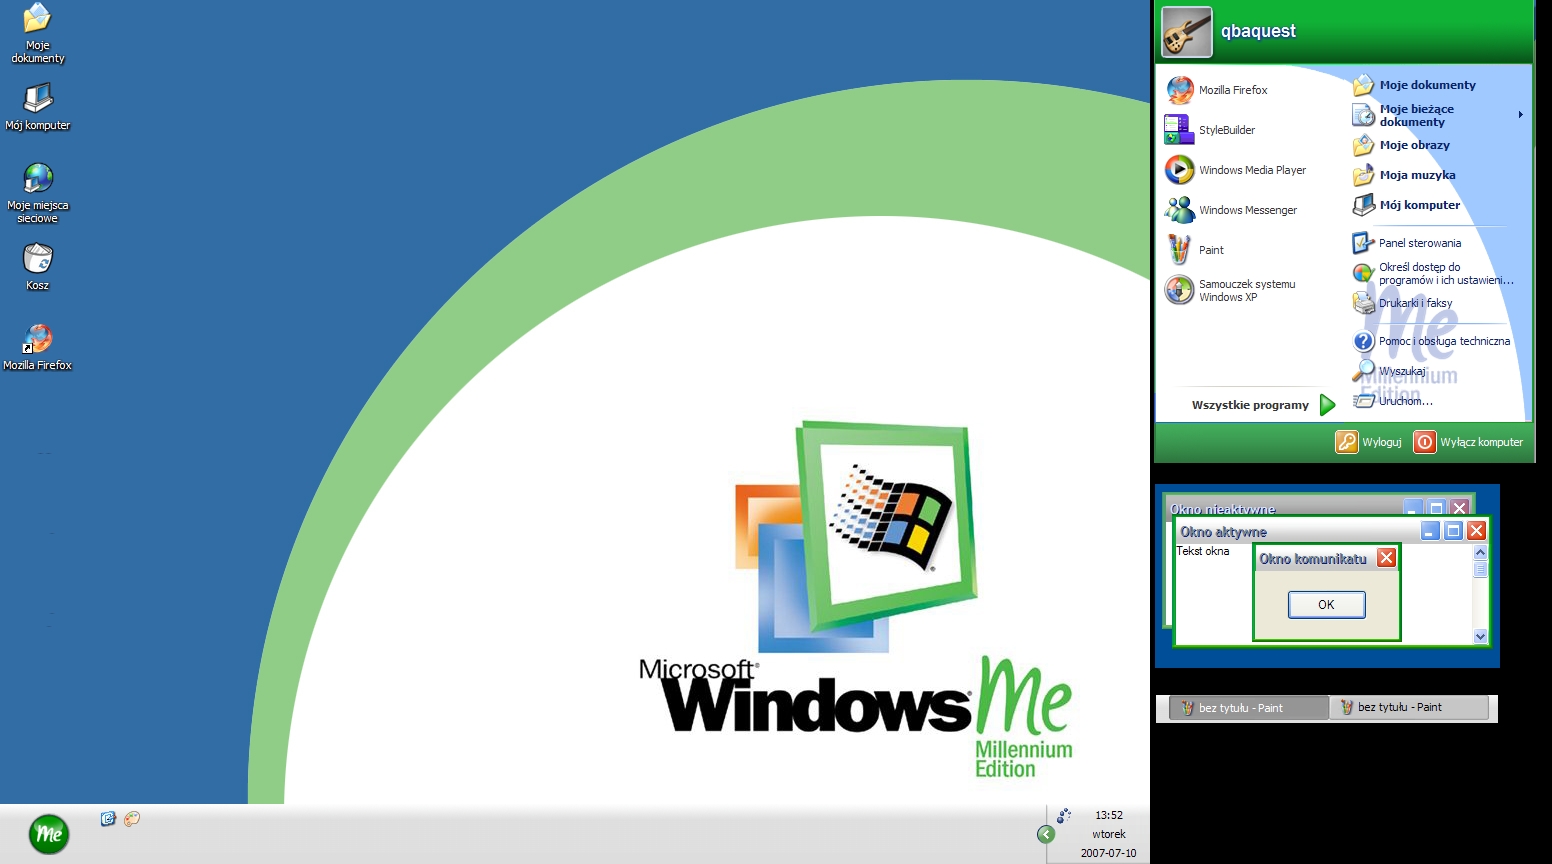 New Windows Me By Qbaquest Customization Skins Themes